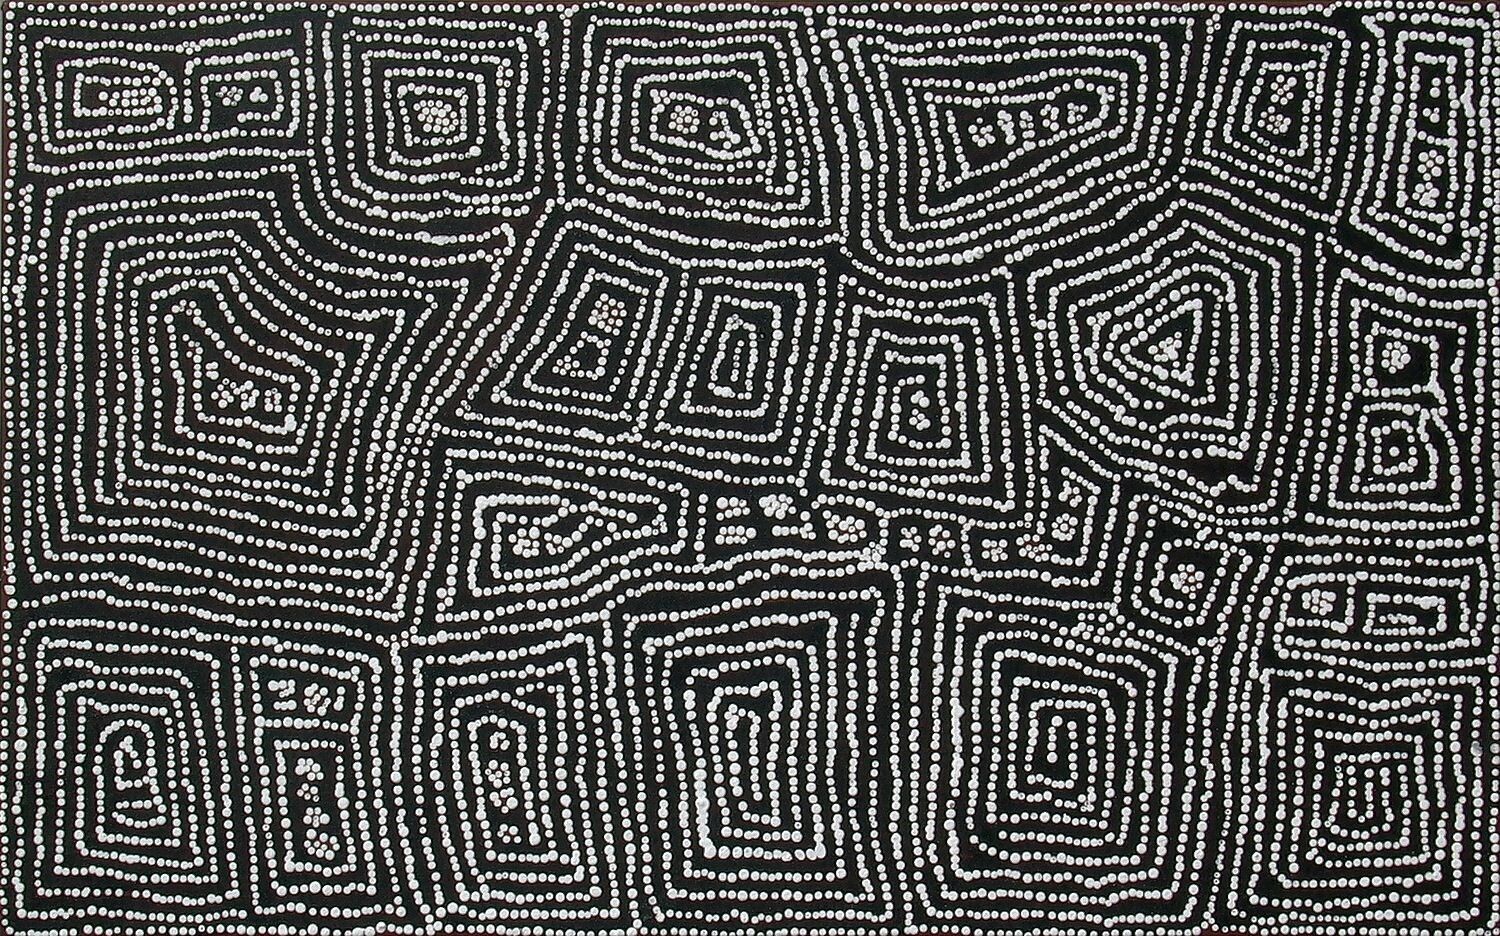 Tingari Cycle (2006) by Barney Campbell Tjakamarra 76x122cm Cat 9553BC